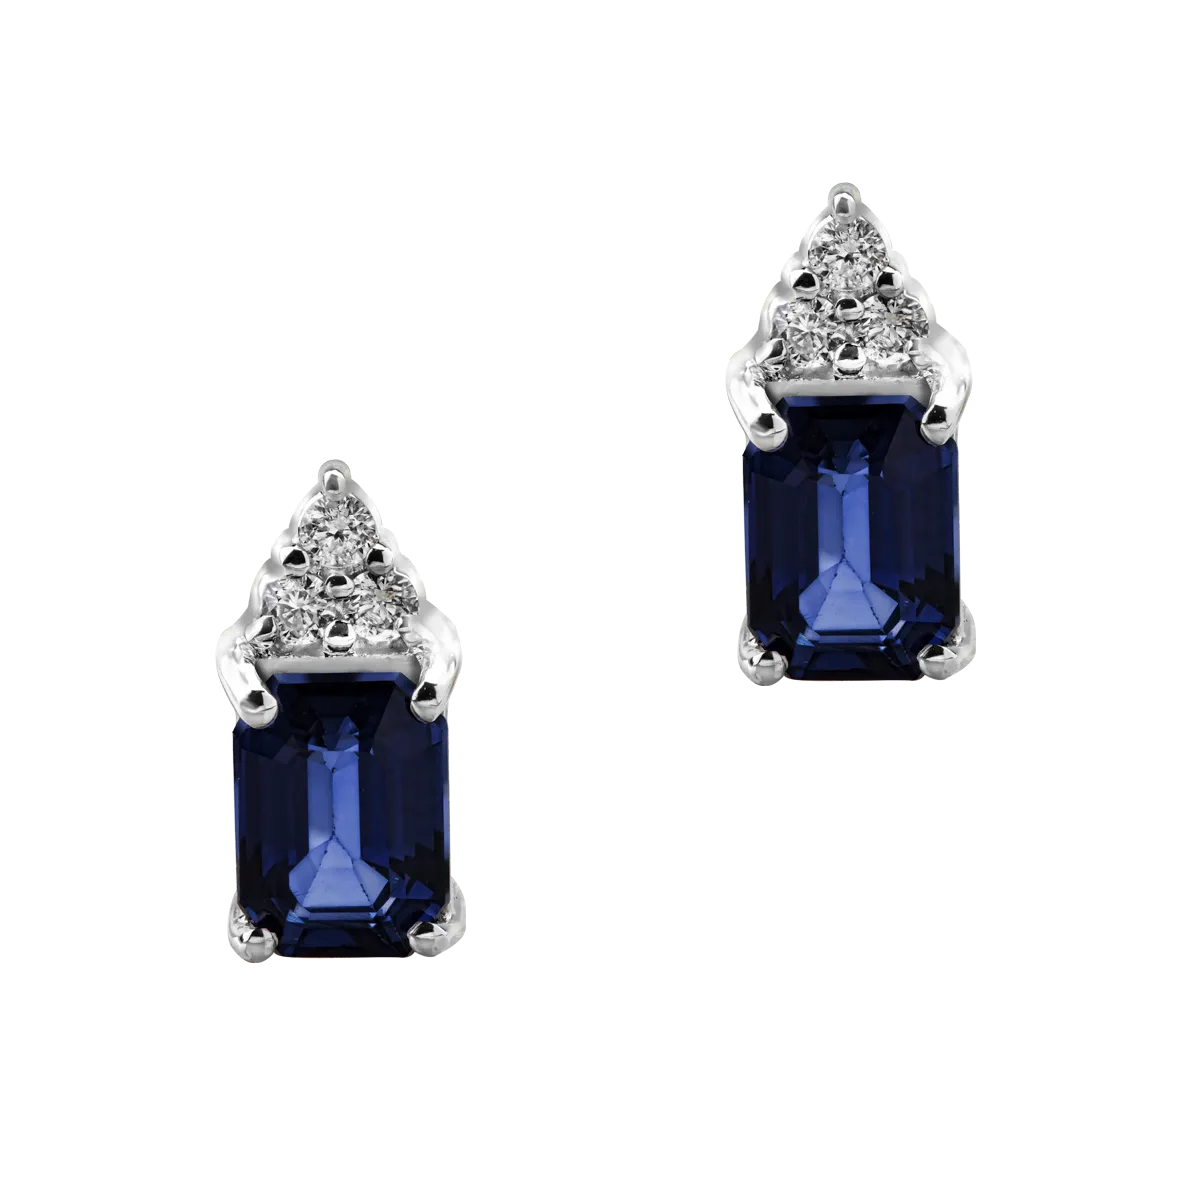 14K white gold earrings with 2.215ct treated sapphires and 0.116ct diamonds